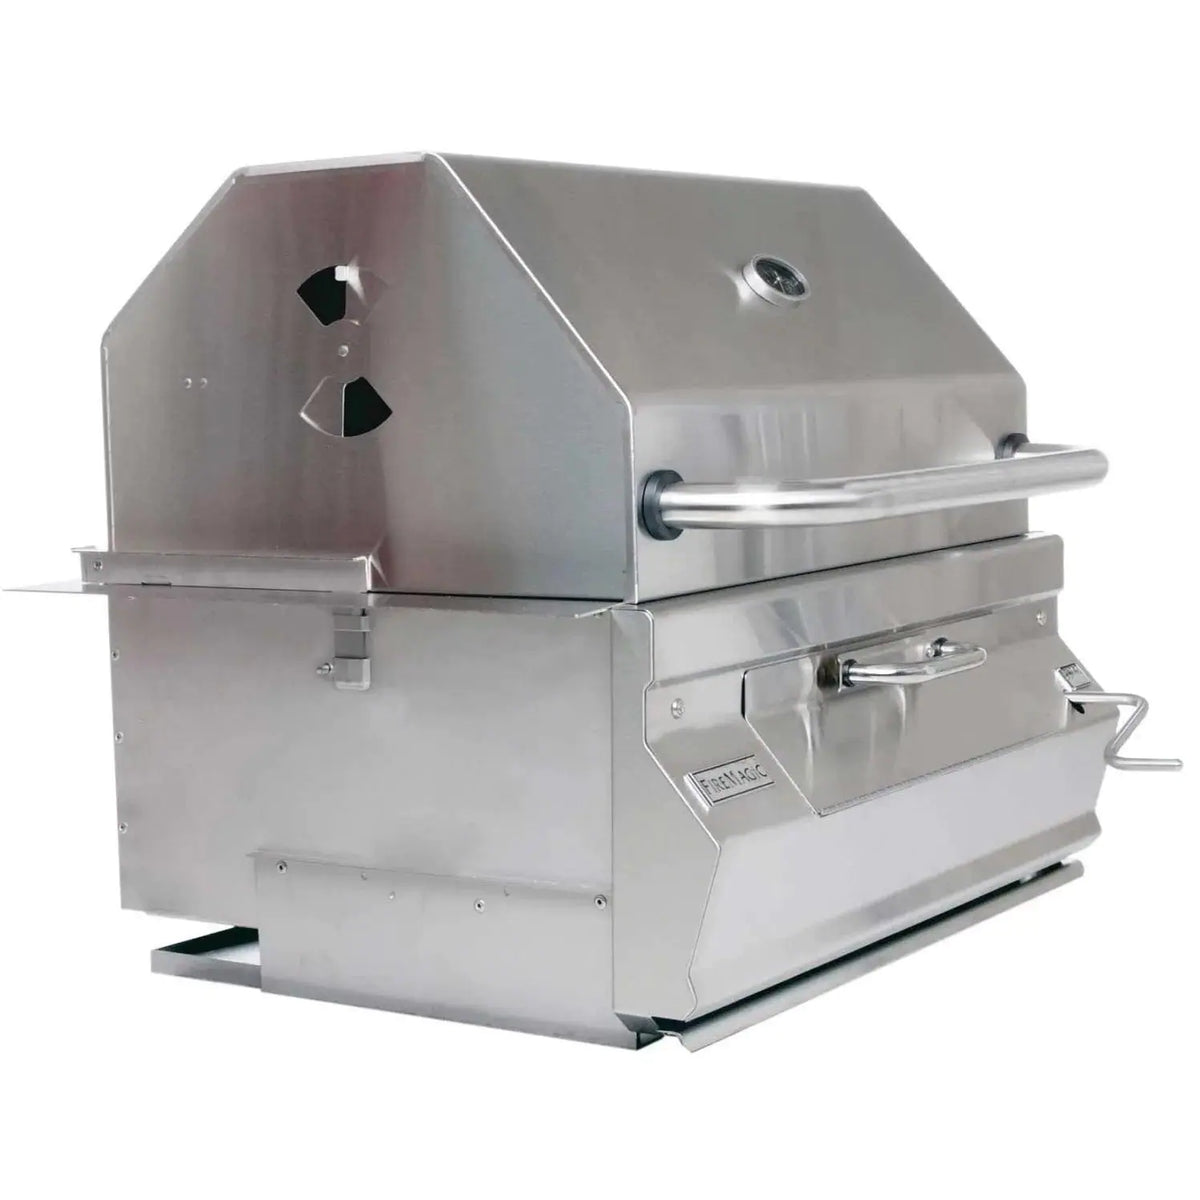 Fire Magic Legacy Charcoal Grill - Angled View